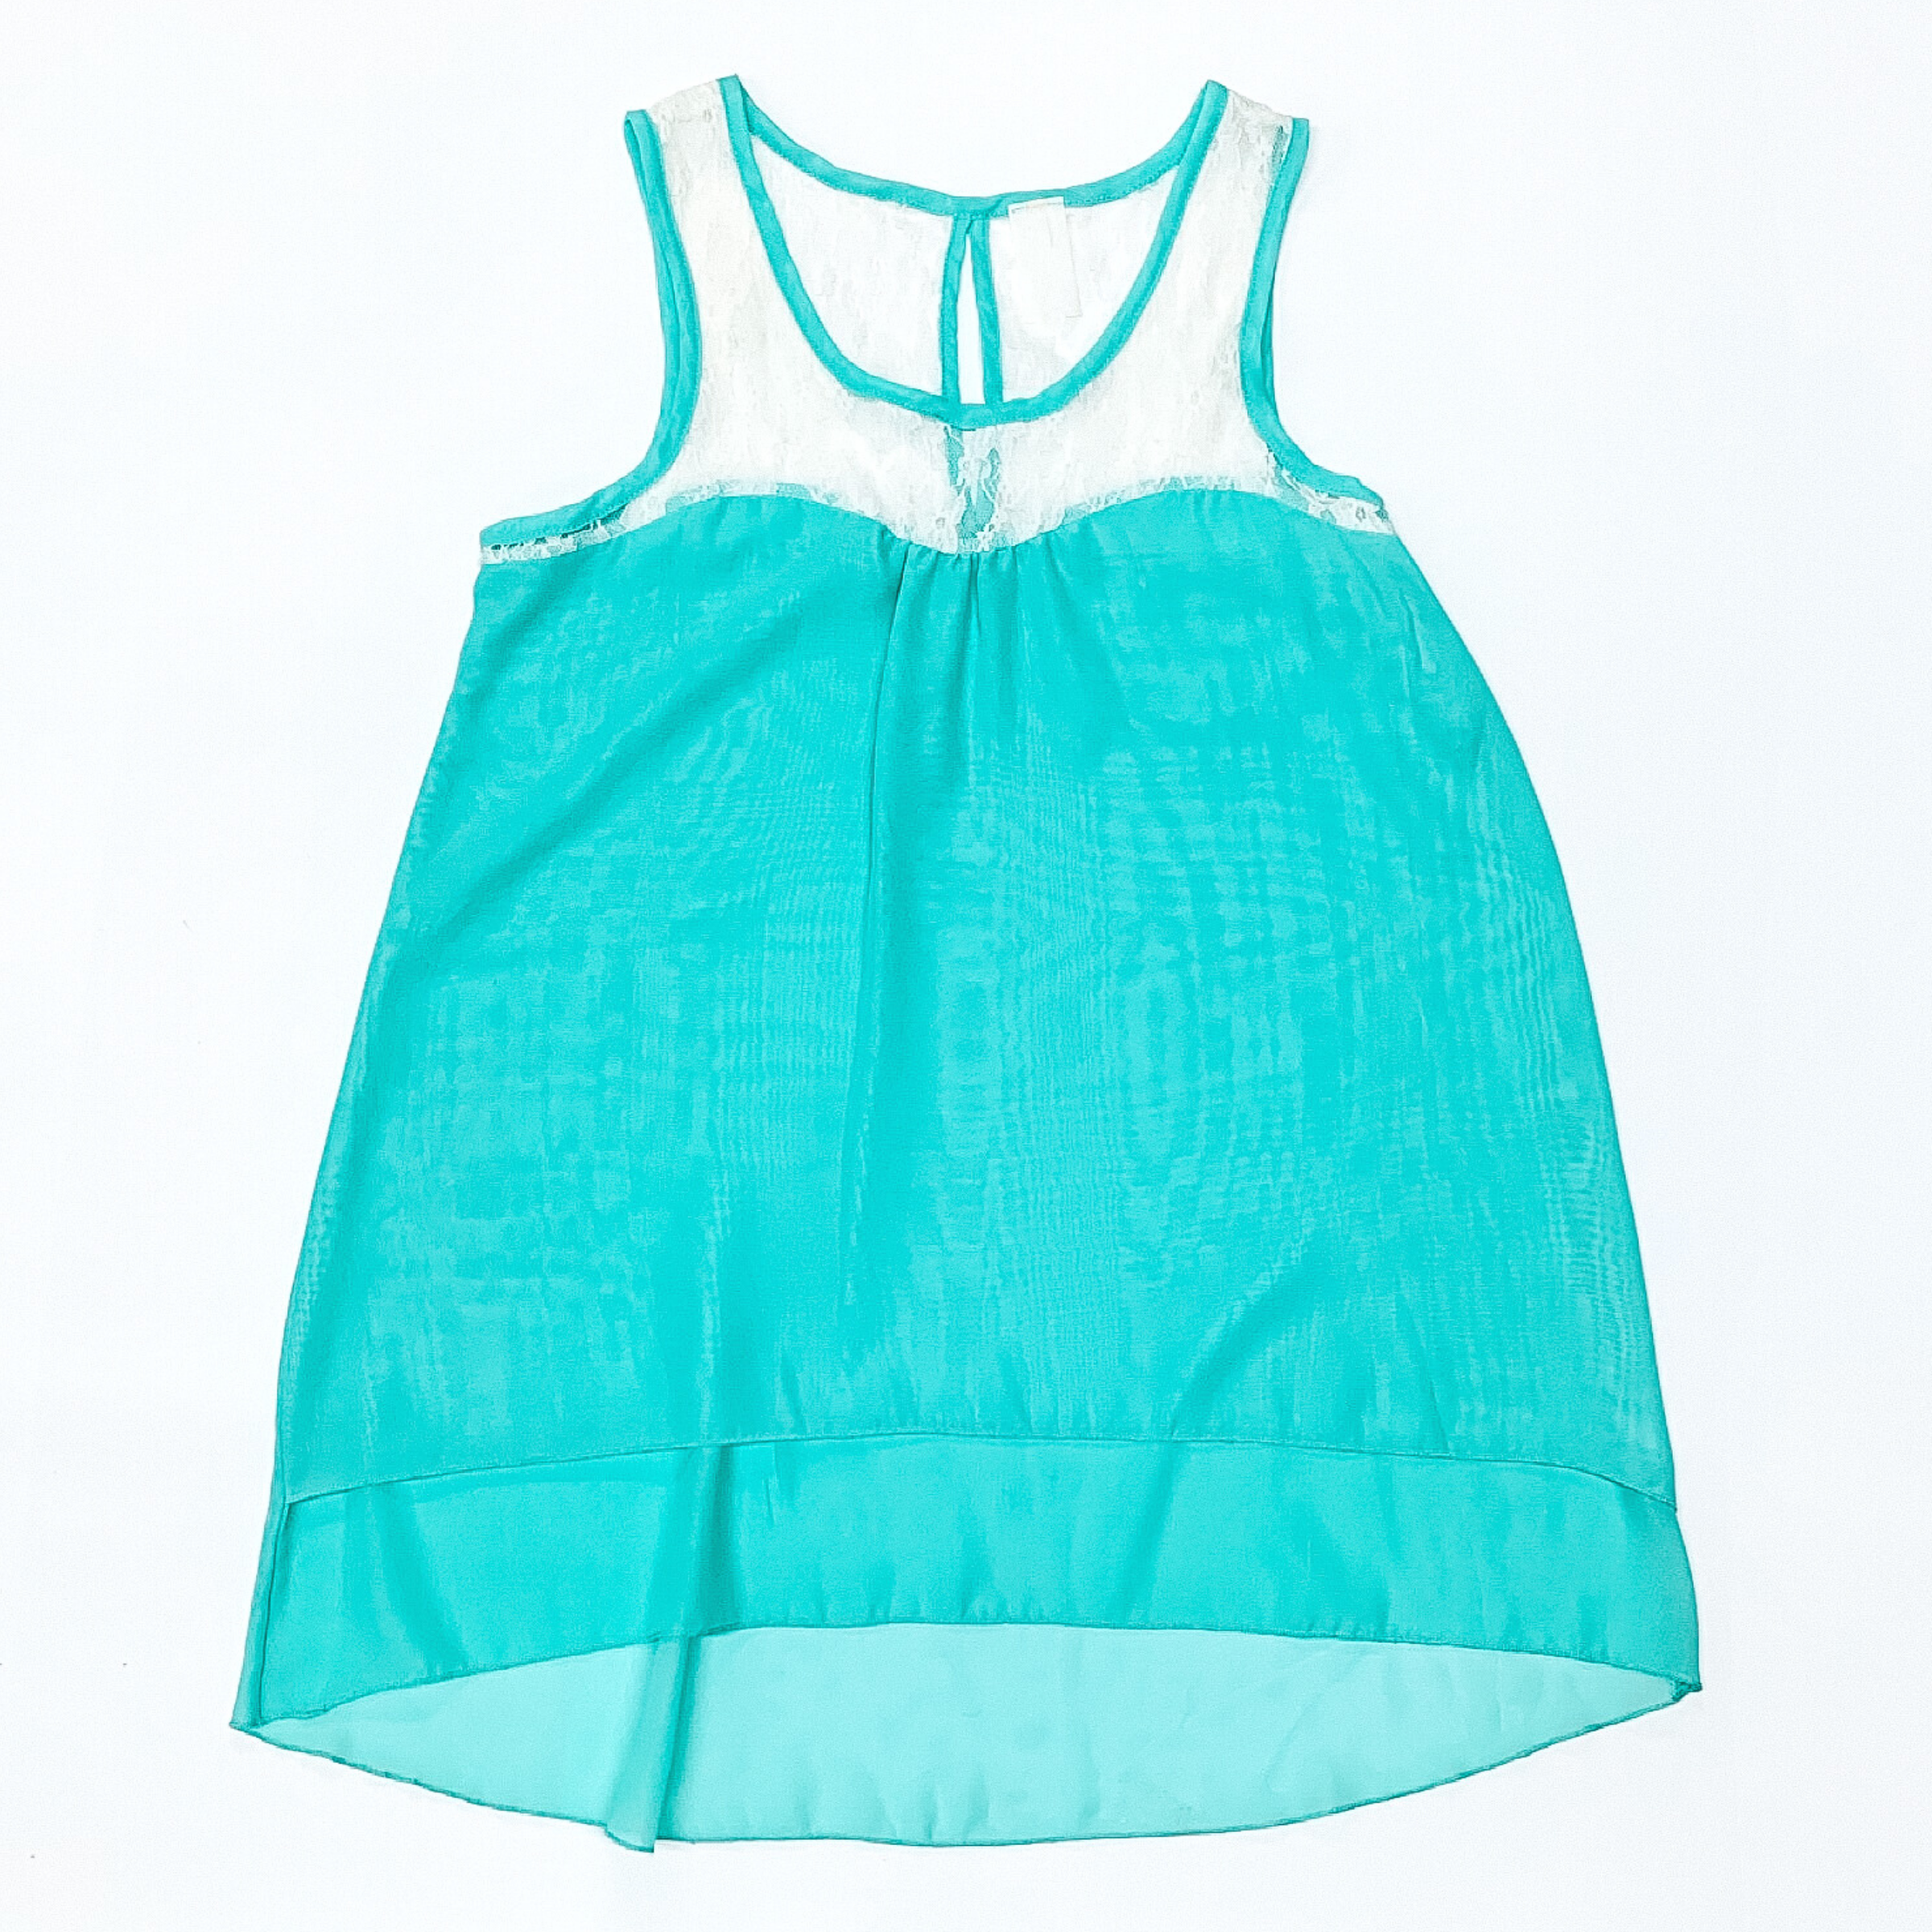 Layered Turquoise Tank Top with White Lace Upper - Giddy Up Glamour Boutique